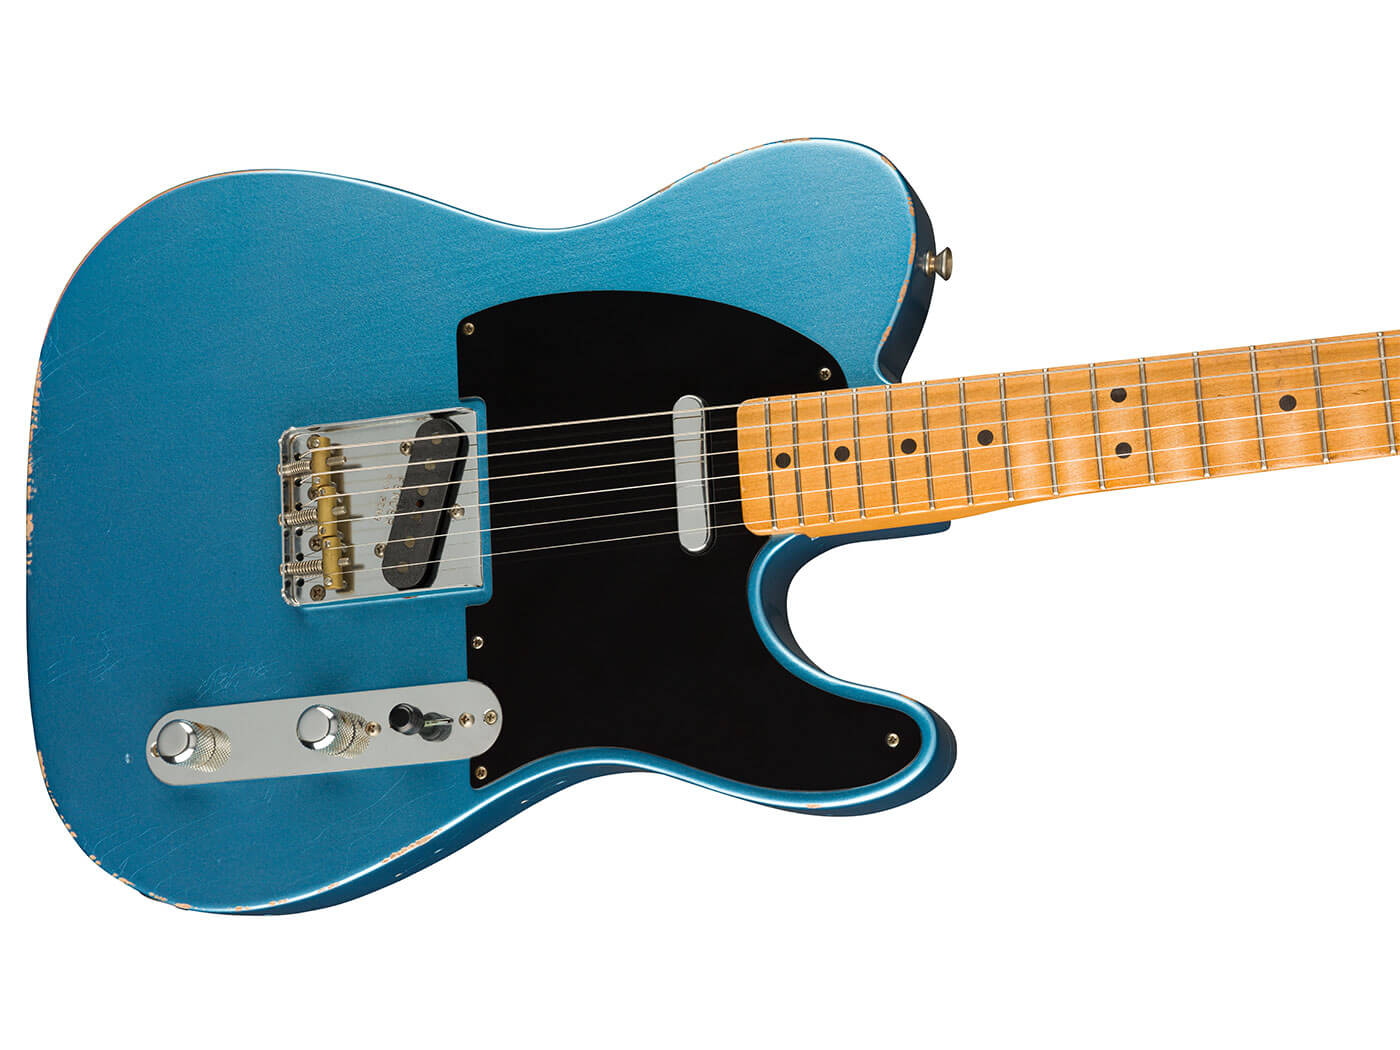 The '50s Telecaster in Lake Placid Blue.